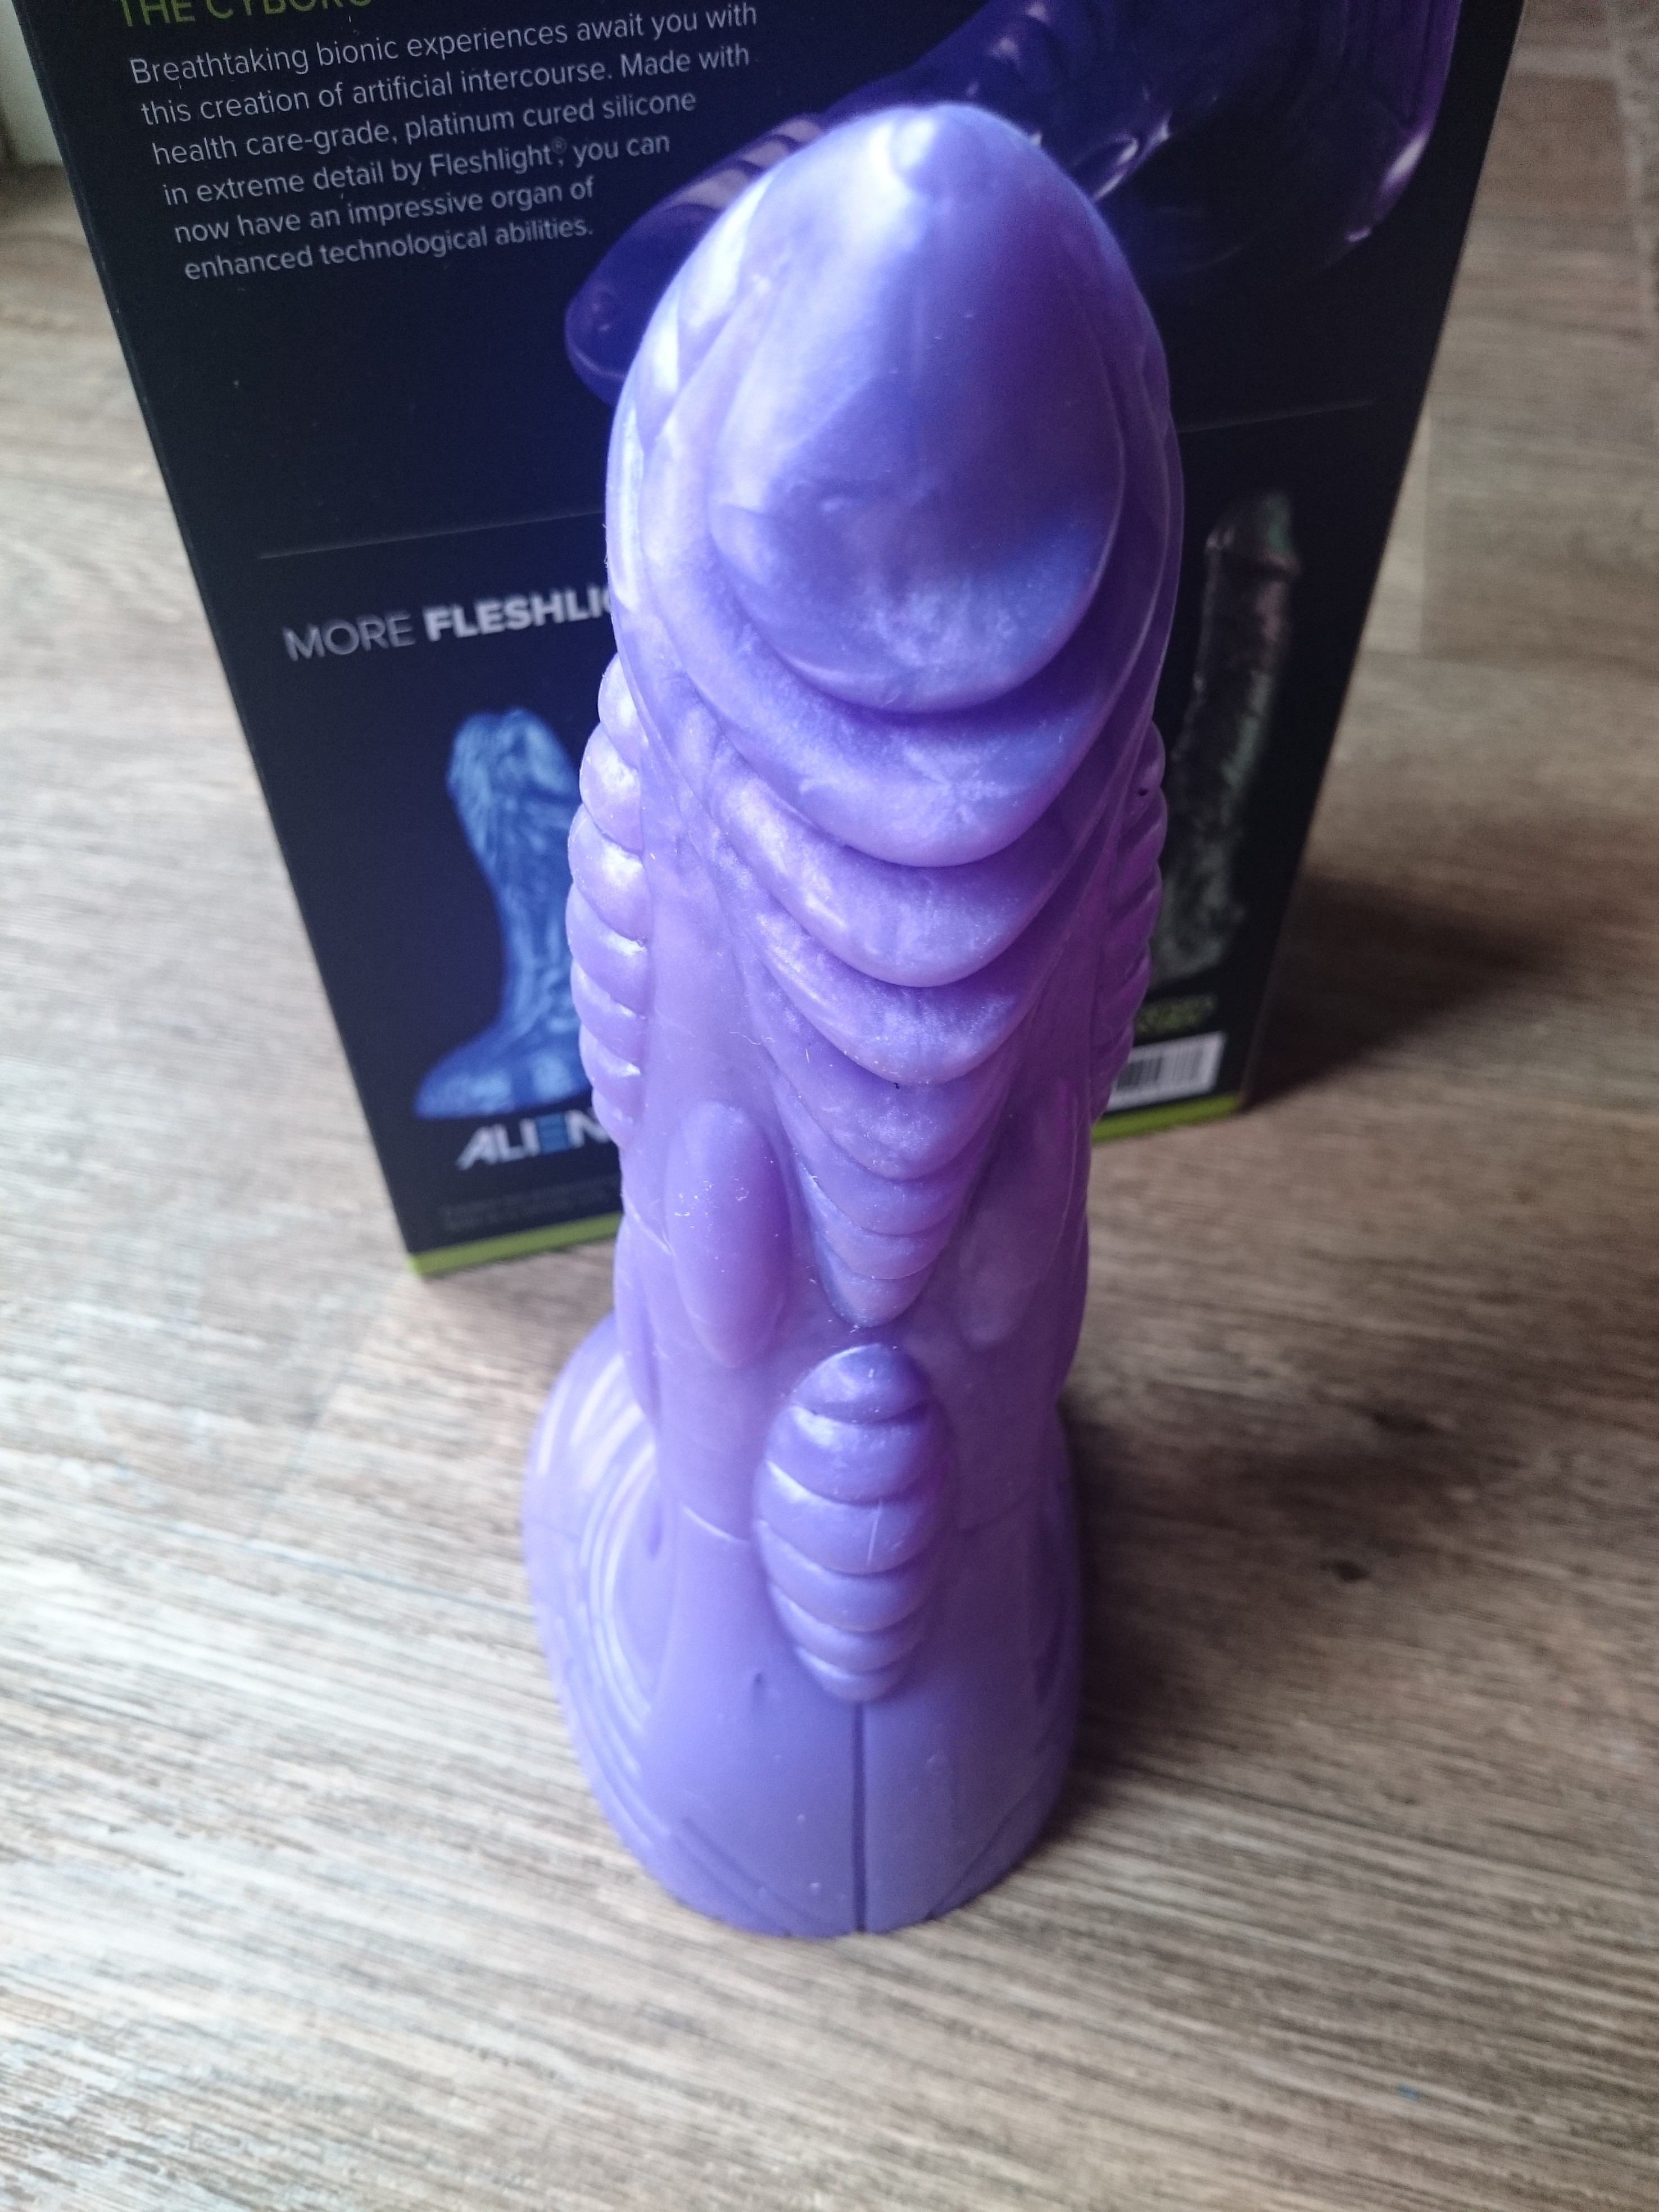 Why is it so hard for me to find a Freak’s dildo that I hate. 